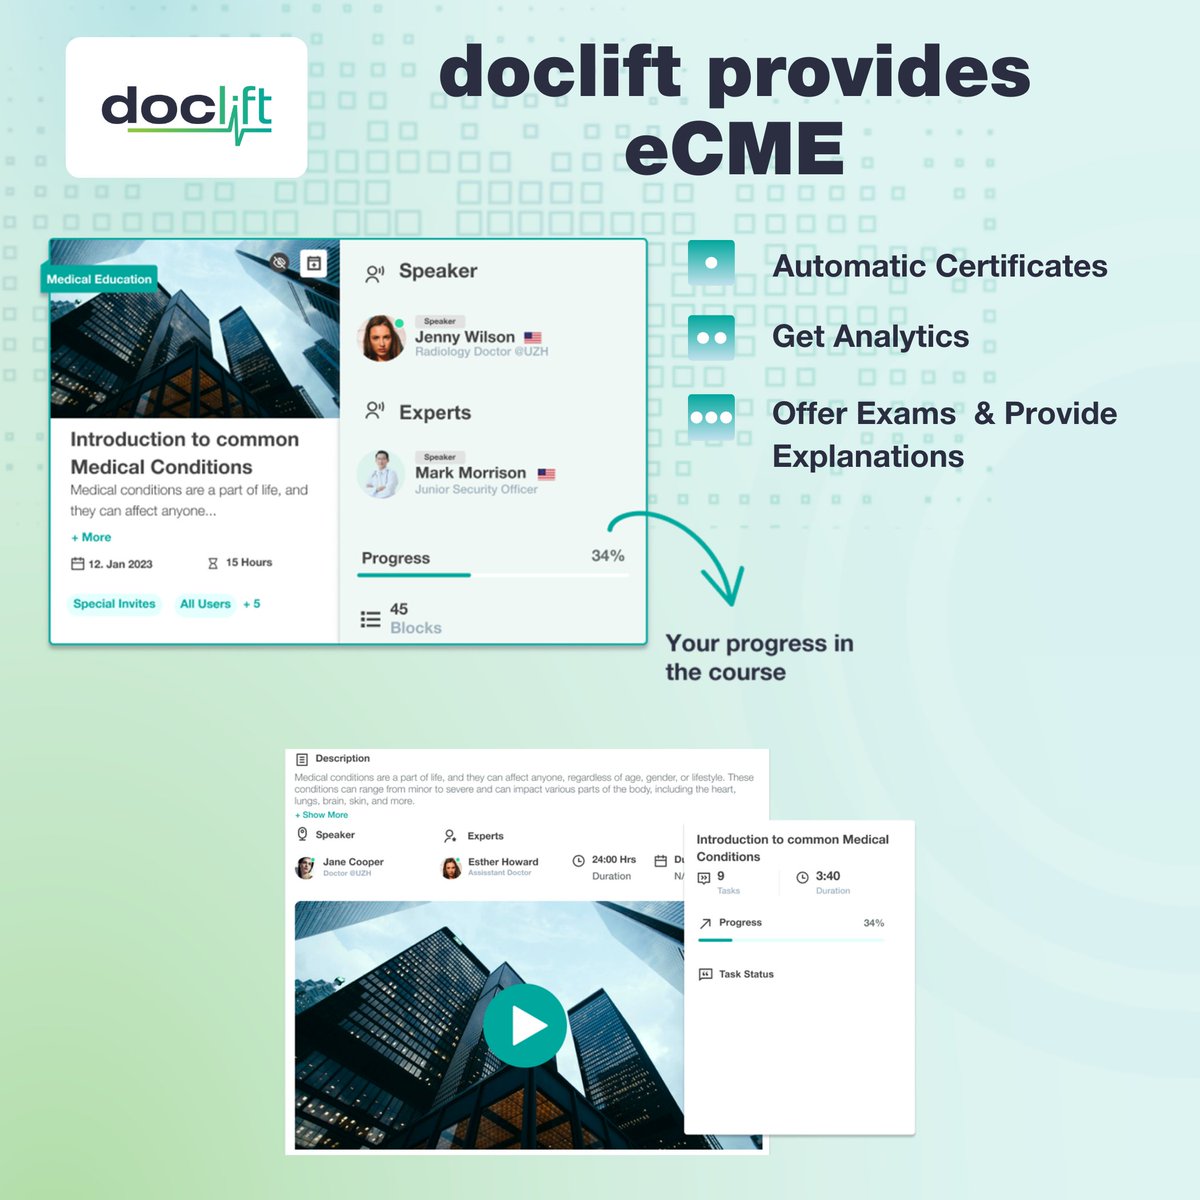 doclift provides CME: Continuing Medical Education for professional development & plays a role in maintaining and enhancing knowledge & skills.
#medicaleducation #medicaltraining #onlinemedicalconferences #onlinemedicaltraining #healthcare #DigitalHealth